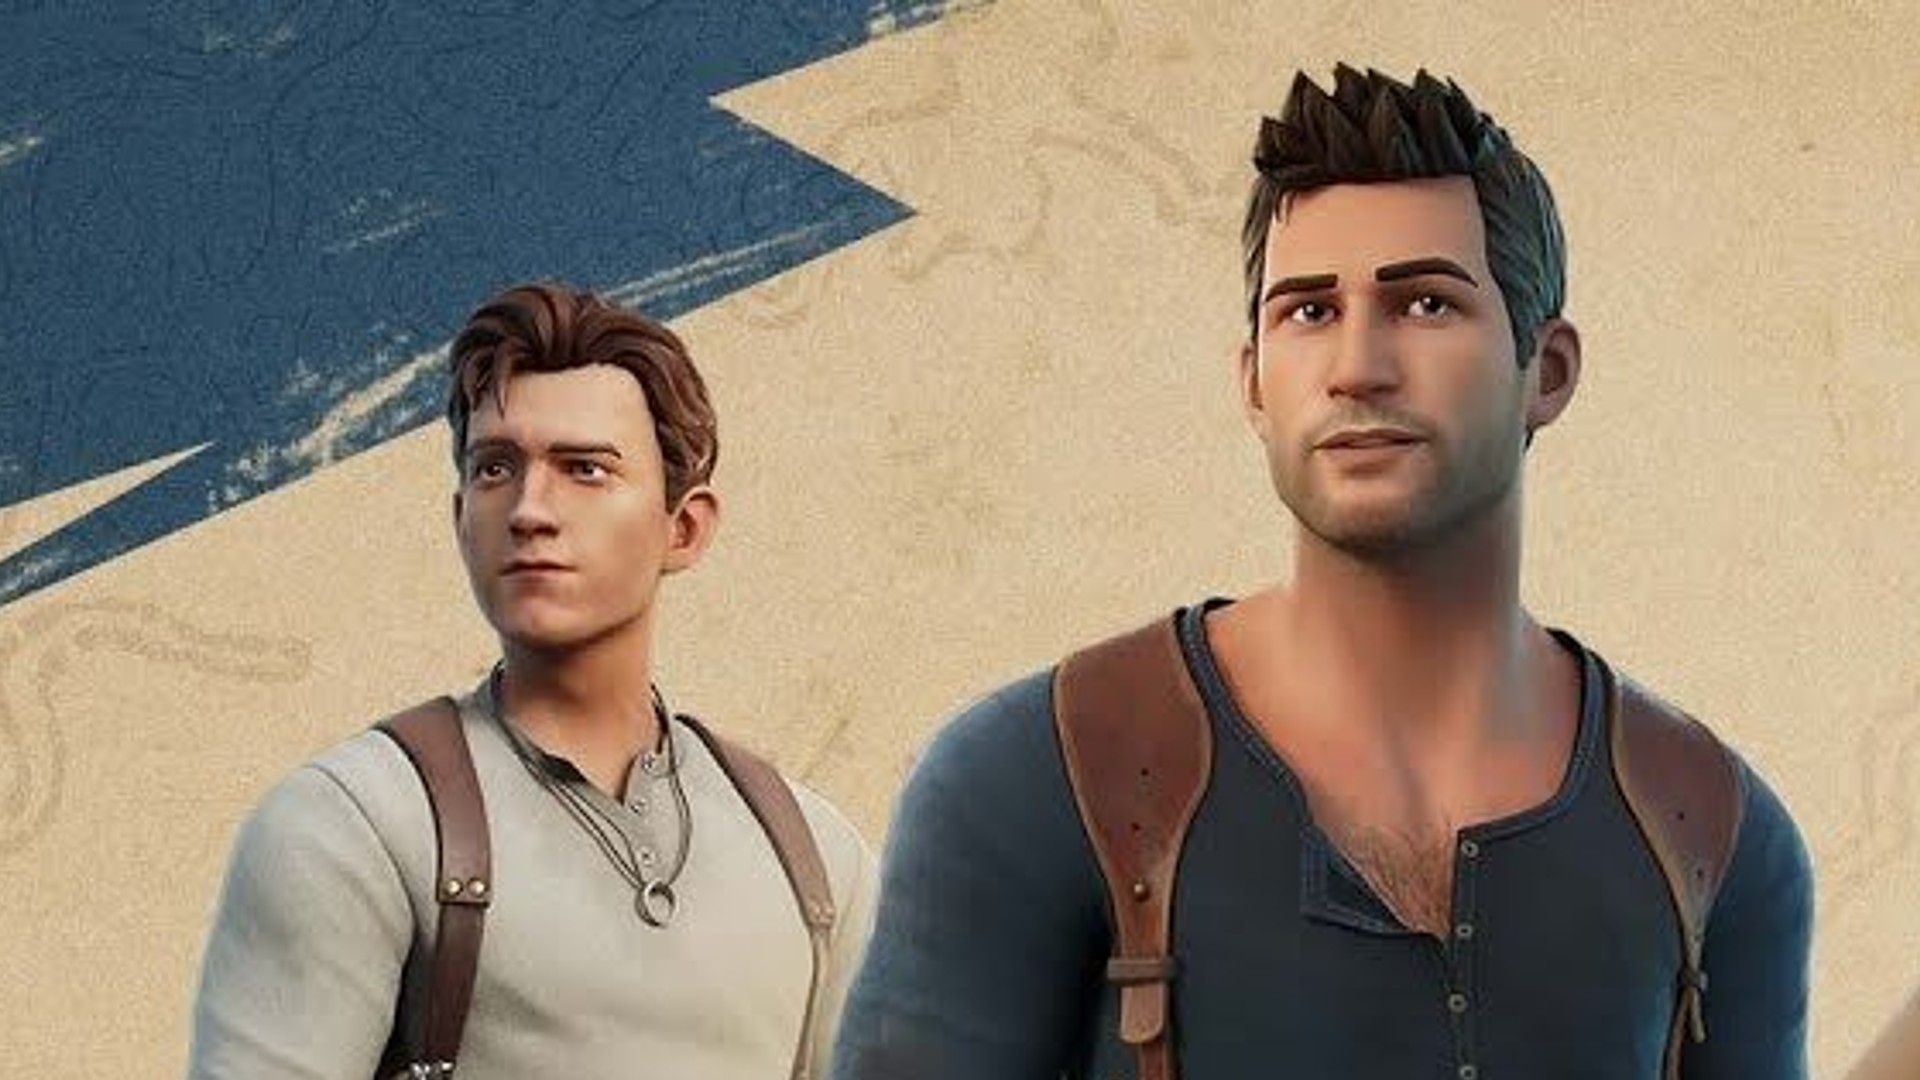 Find your Fortune on the Fortnite Island with Nathan Drake and Chloe Frazer  from the Uncharted Series – PlayStation.Blog